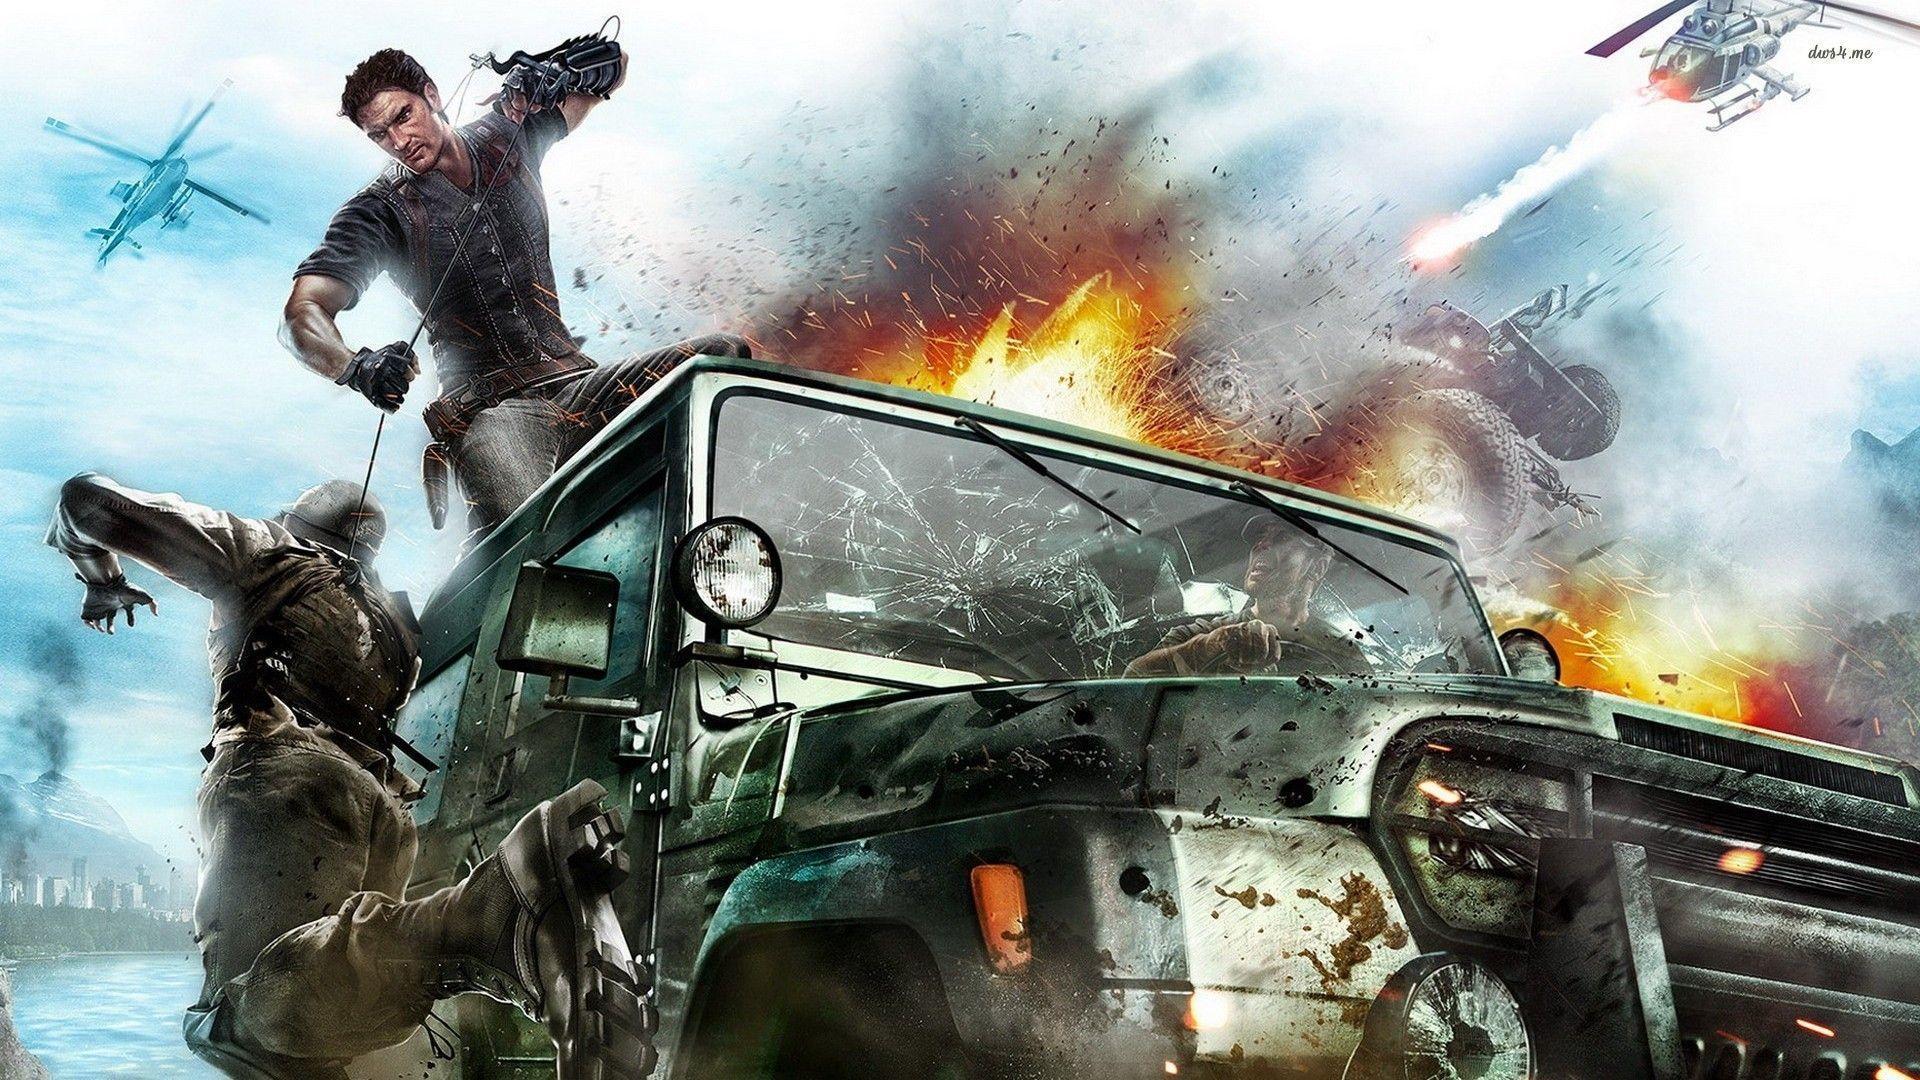 Just Cause 2 Wallpapers Wallpaper Cave